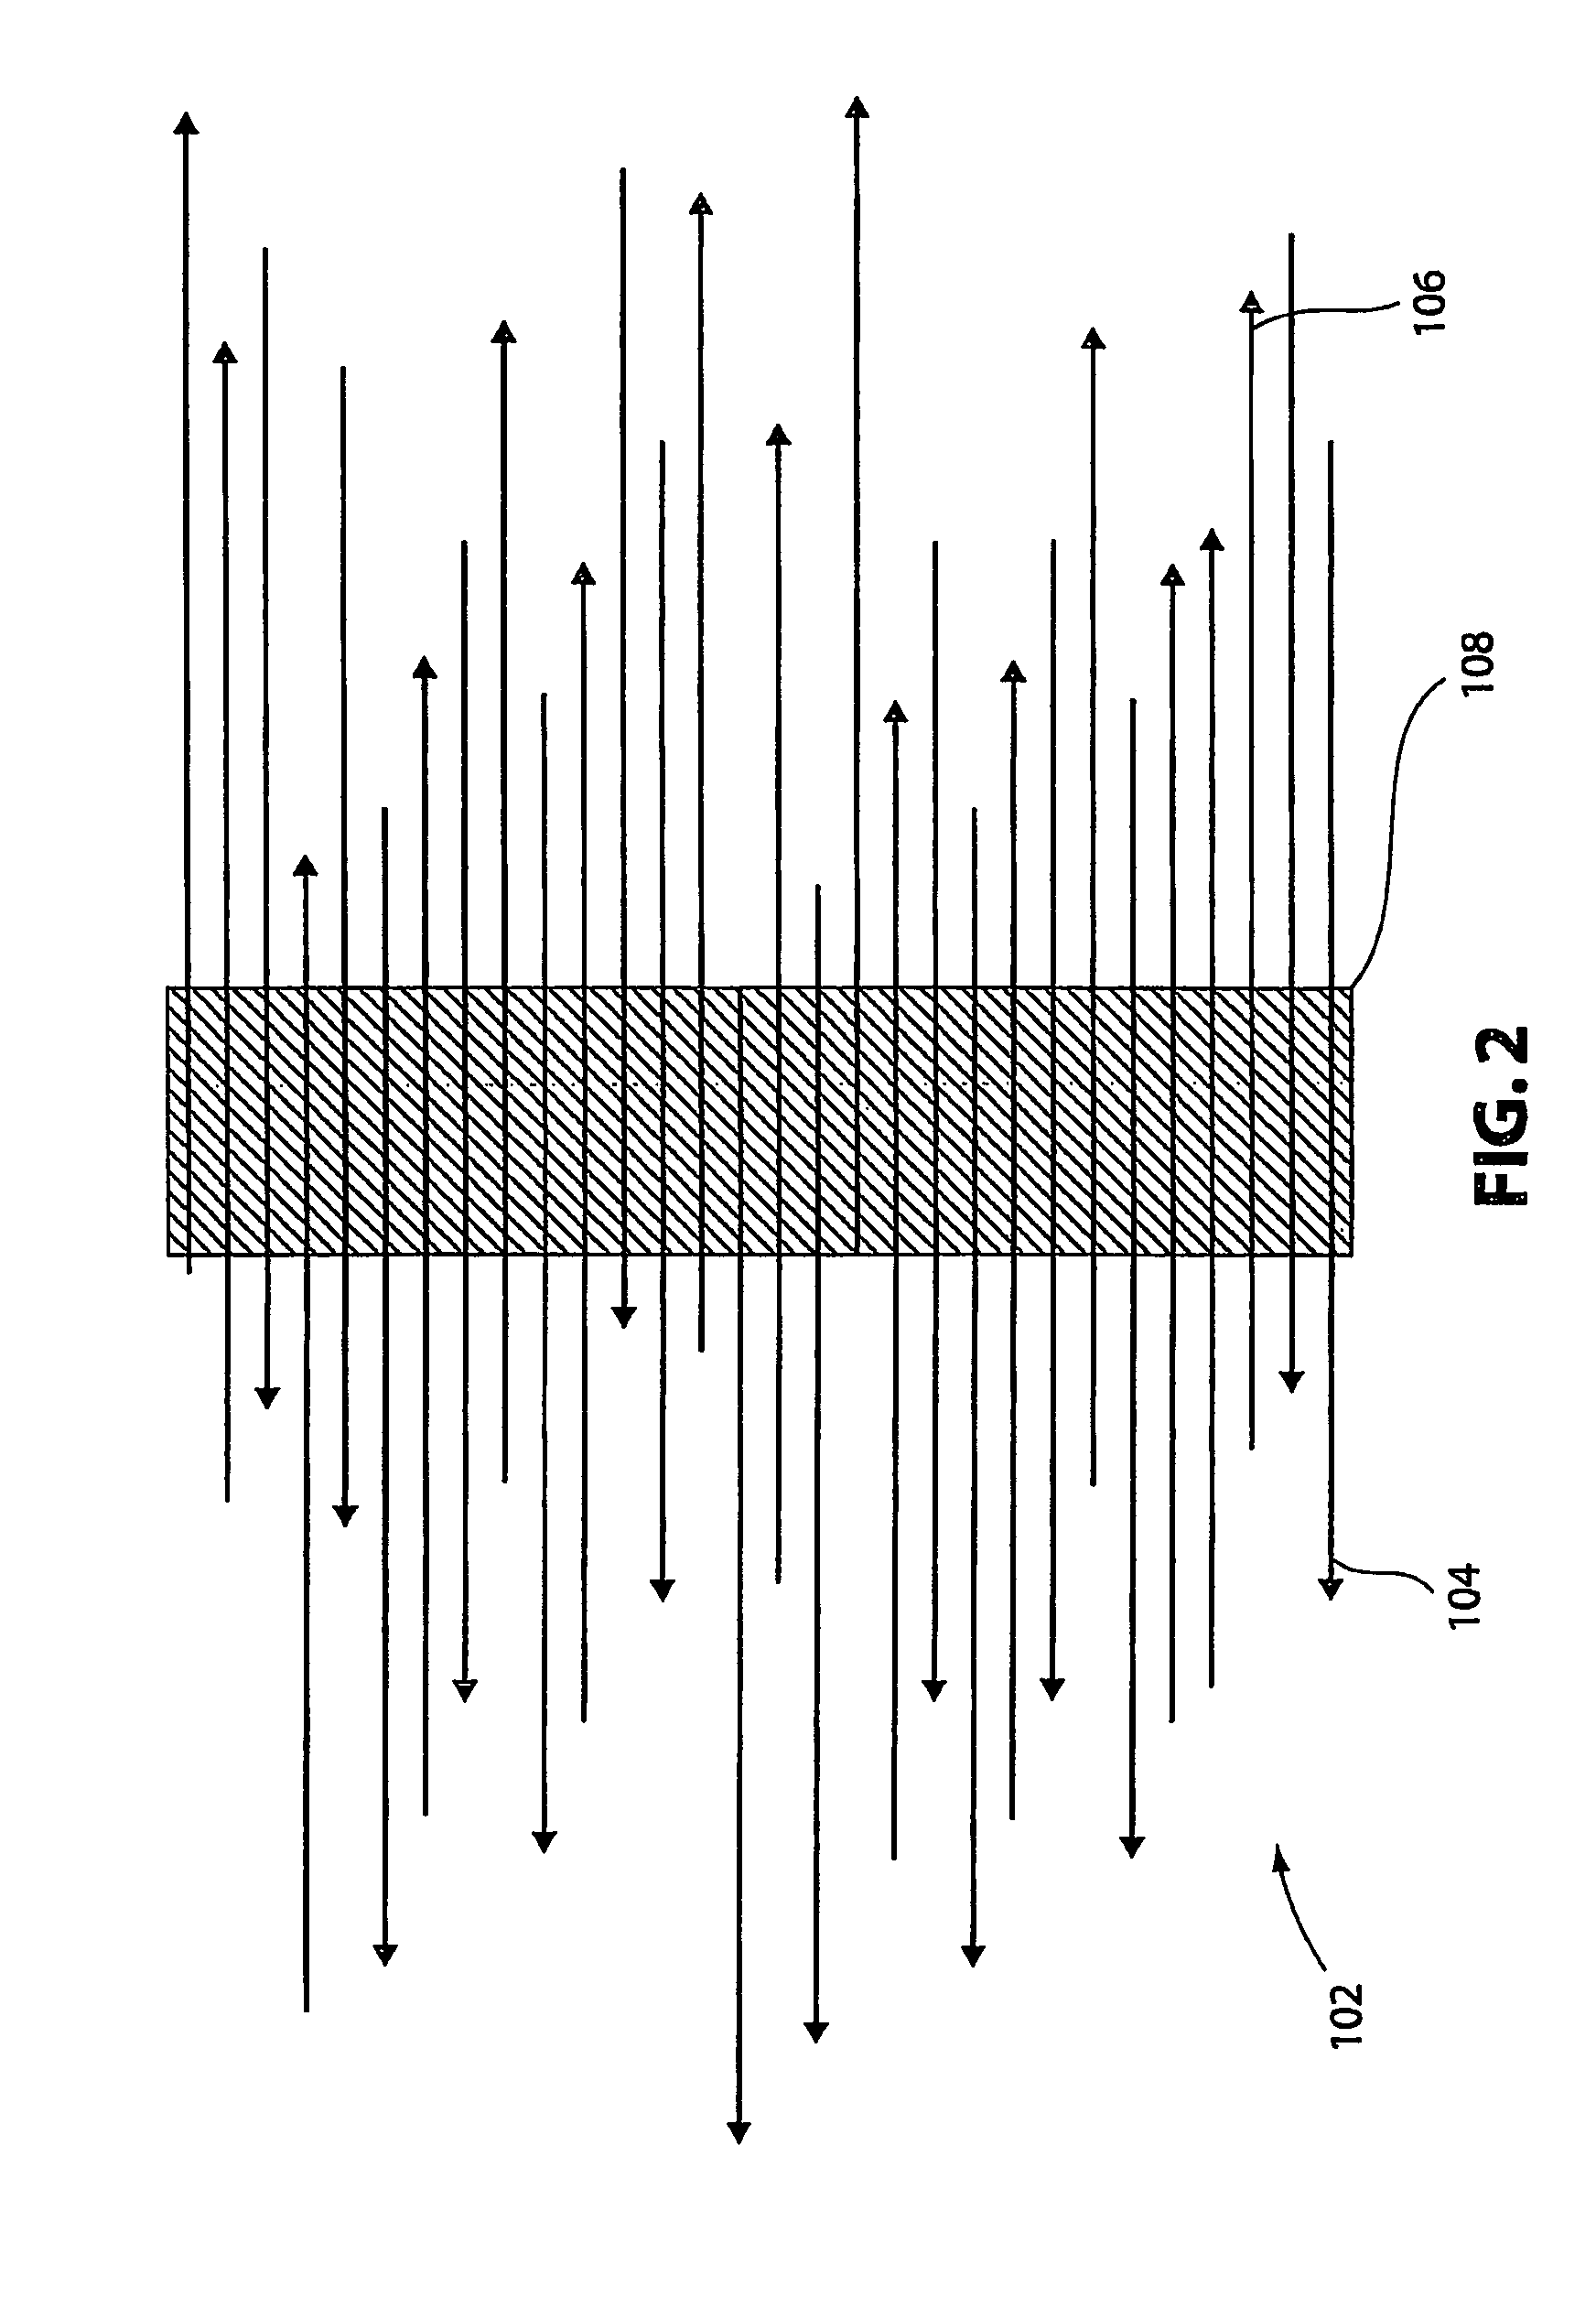 DNA sequence assembly methods of short reads